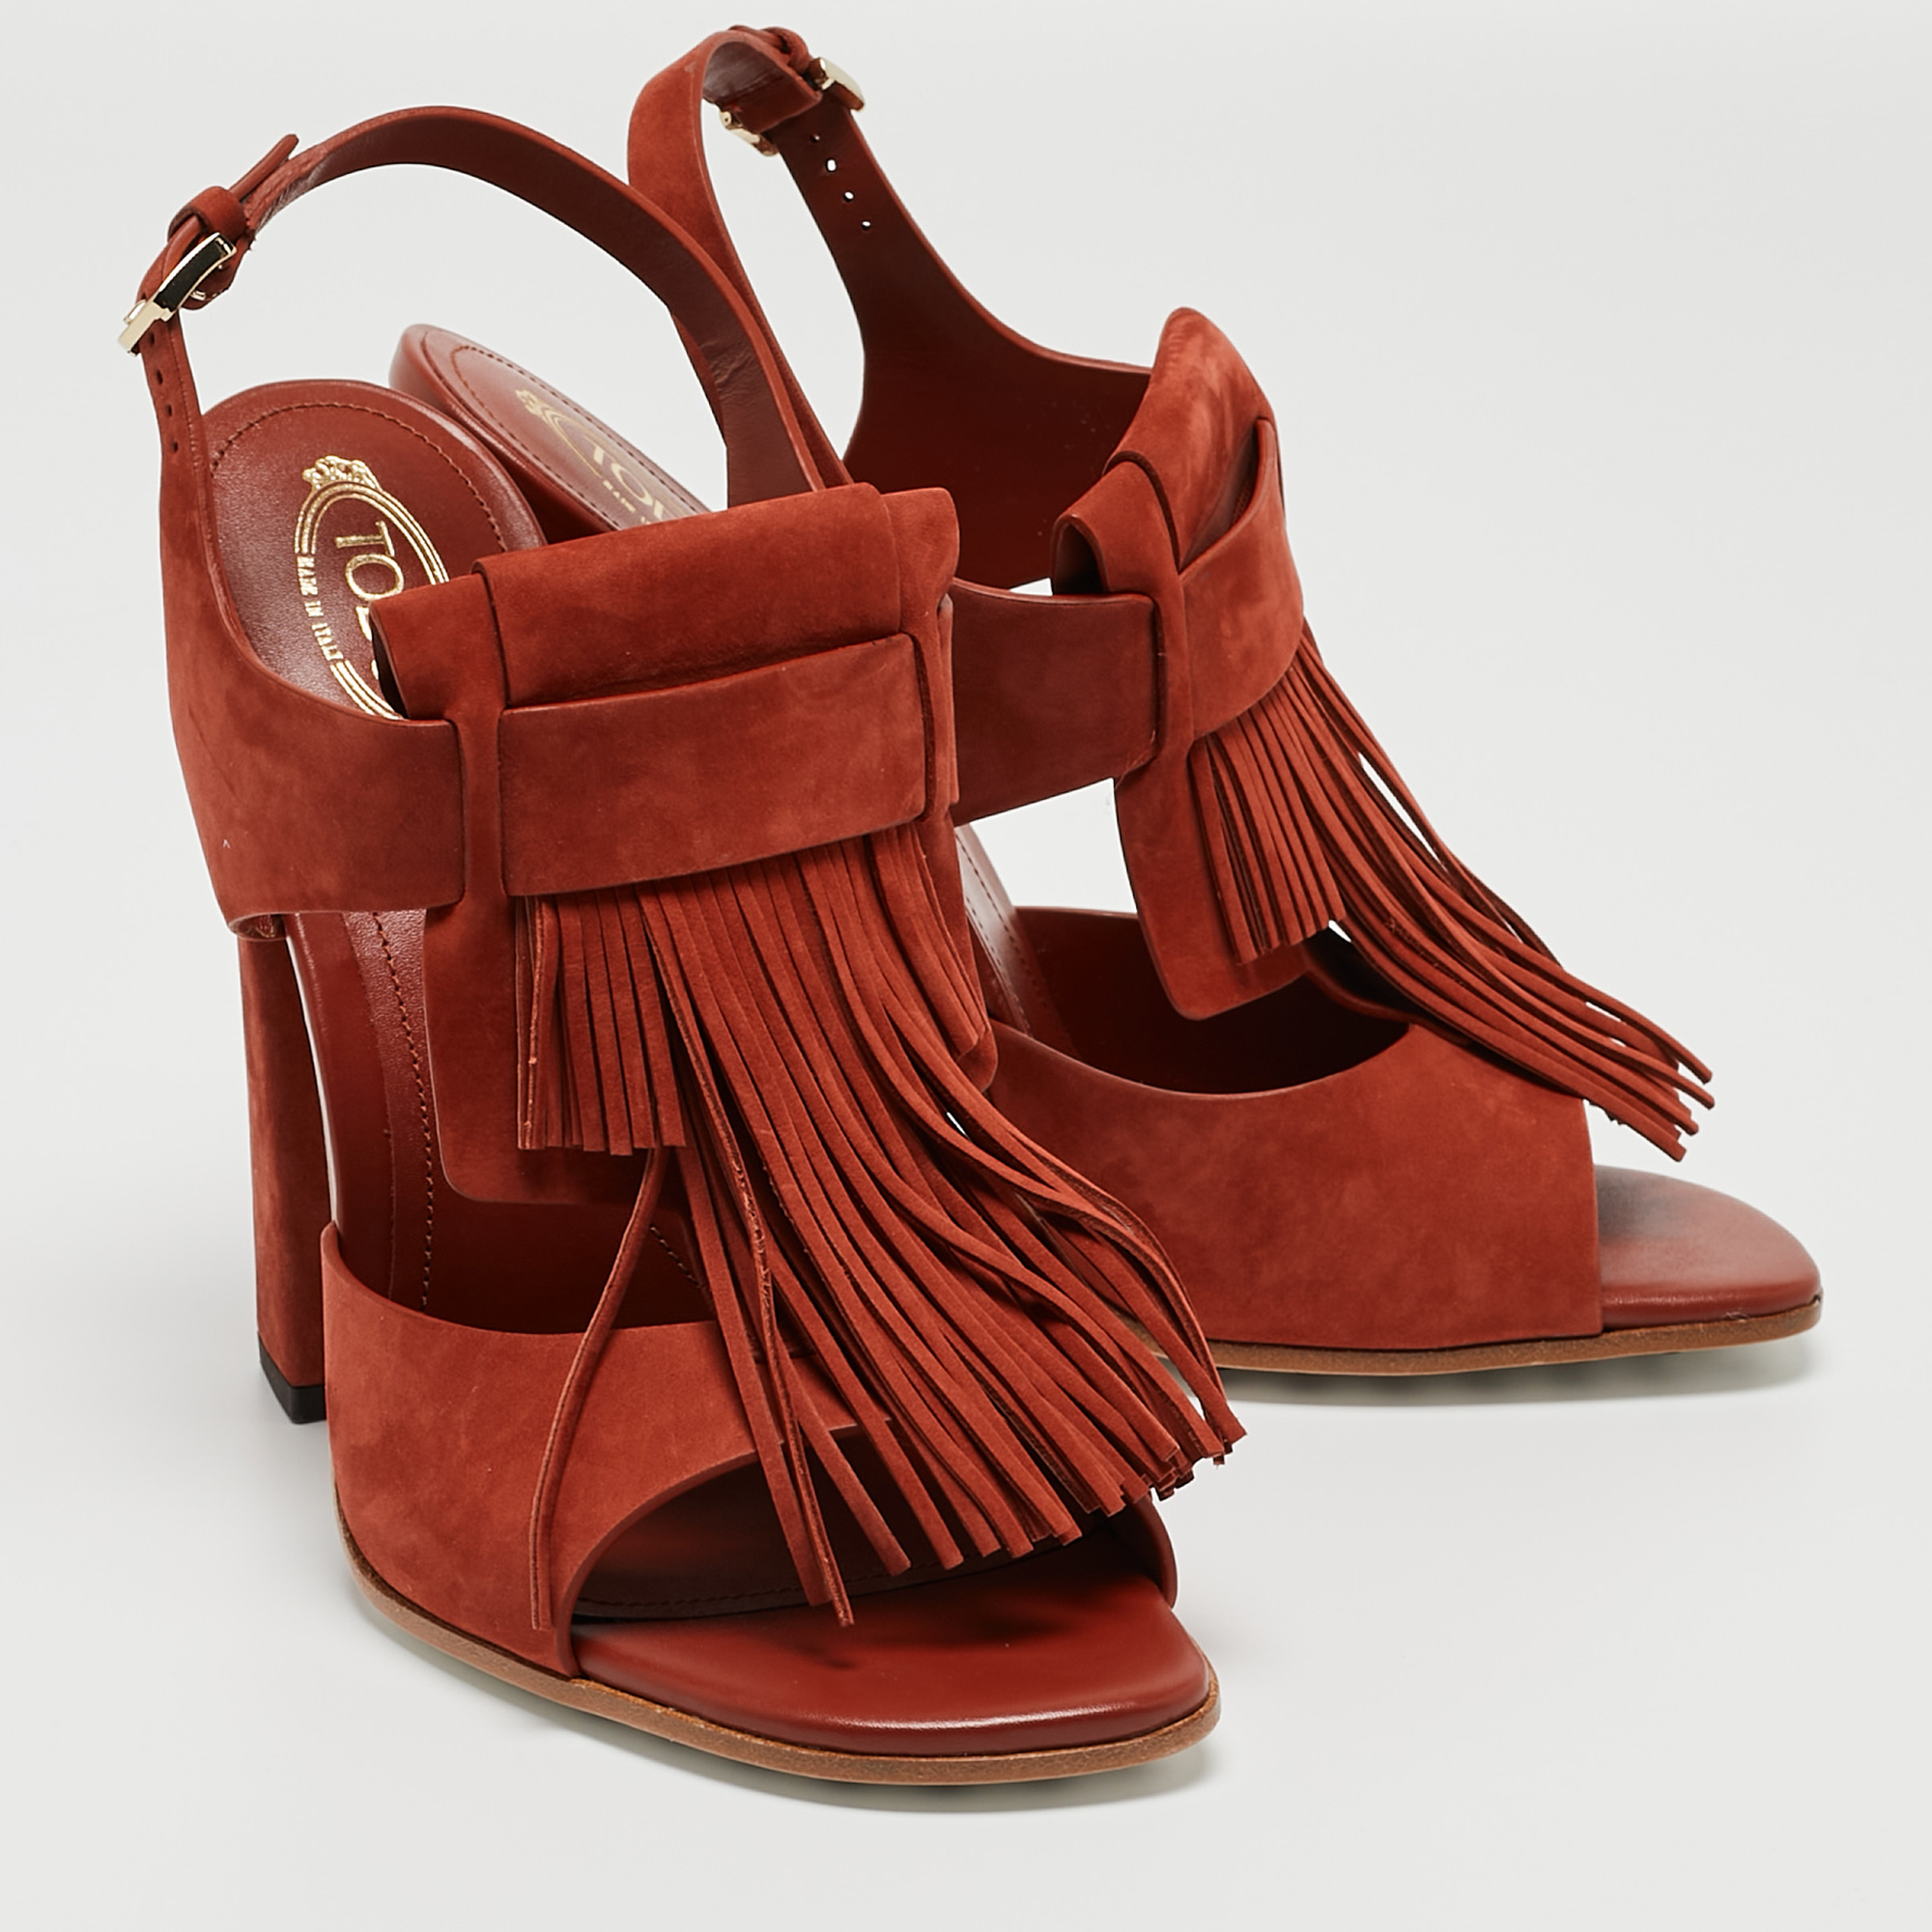 Tod's Maroon Suede Fringe Ankle Strap Sandals Size 40